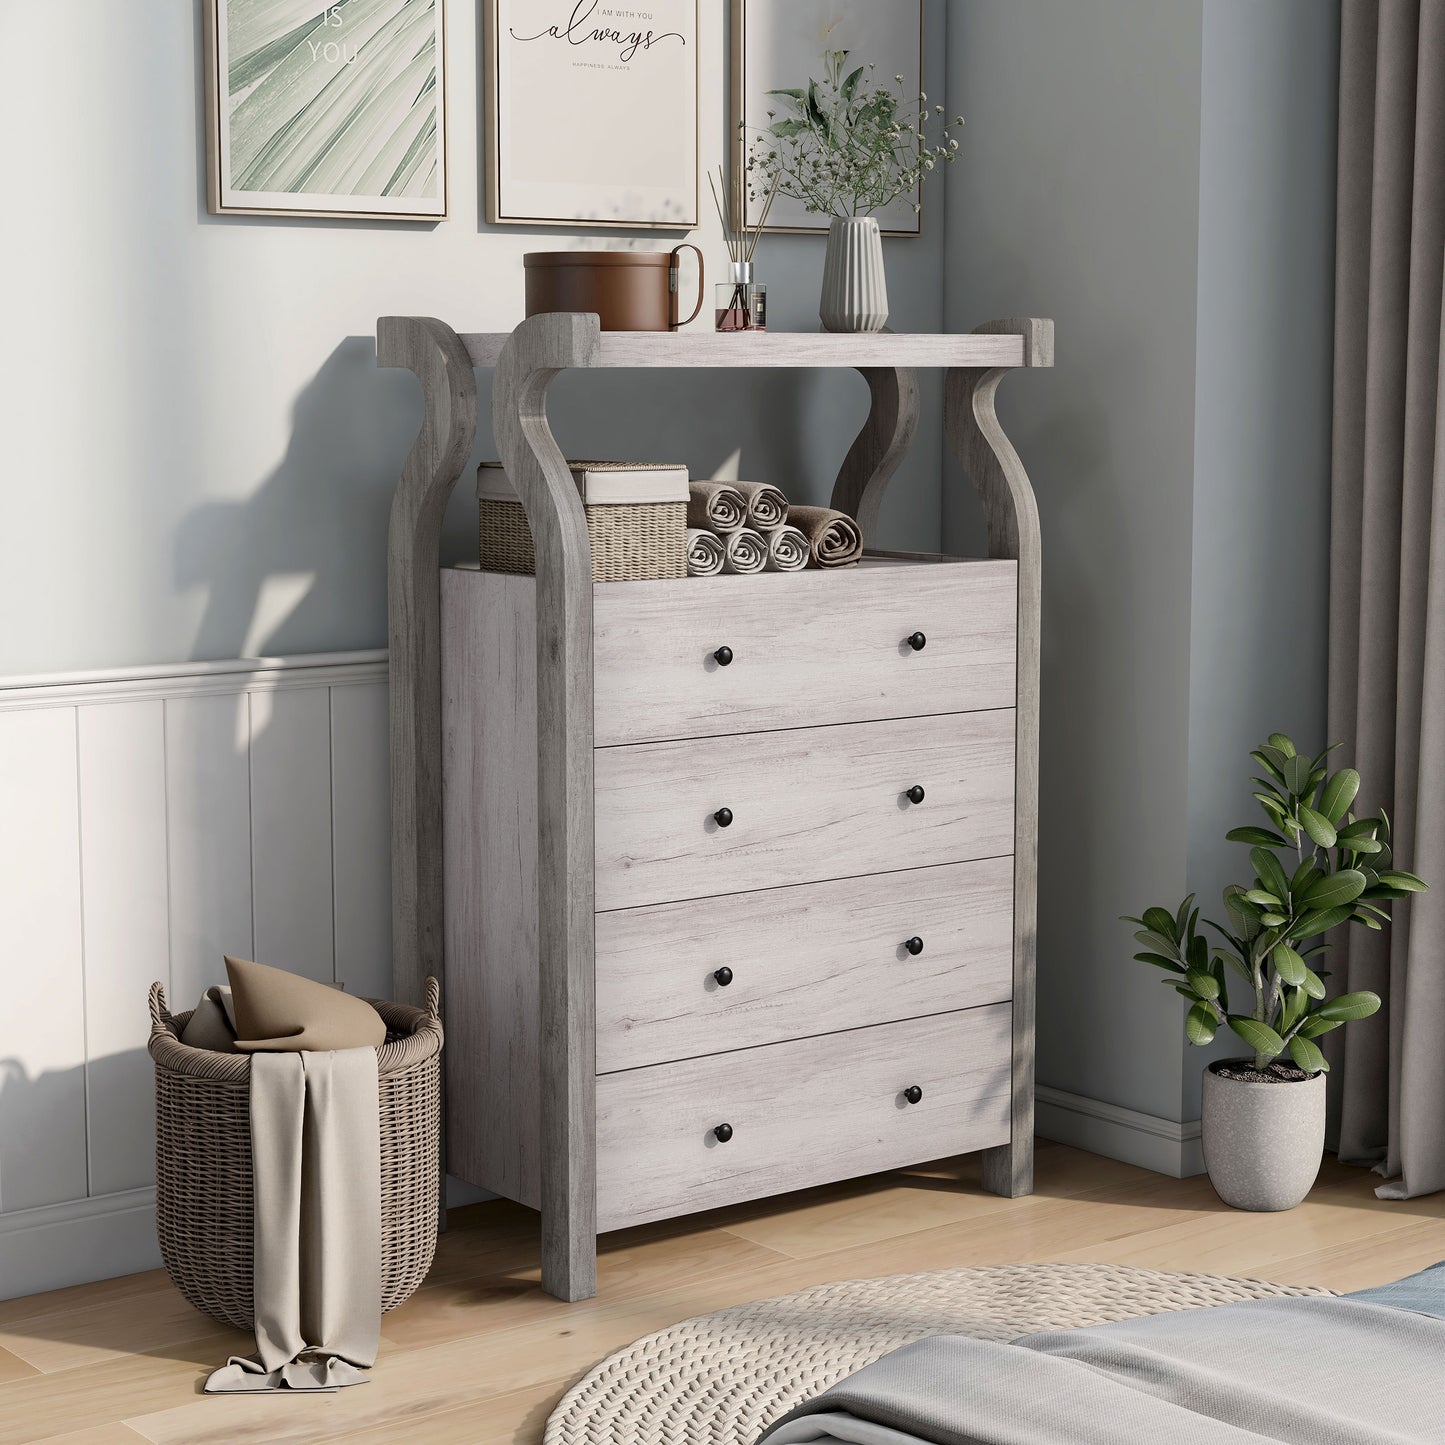 Right angled transitional coastal white four-drawer tall dresser with a shelf in a bedroom with accessories